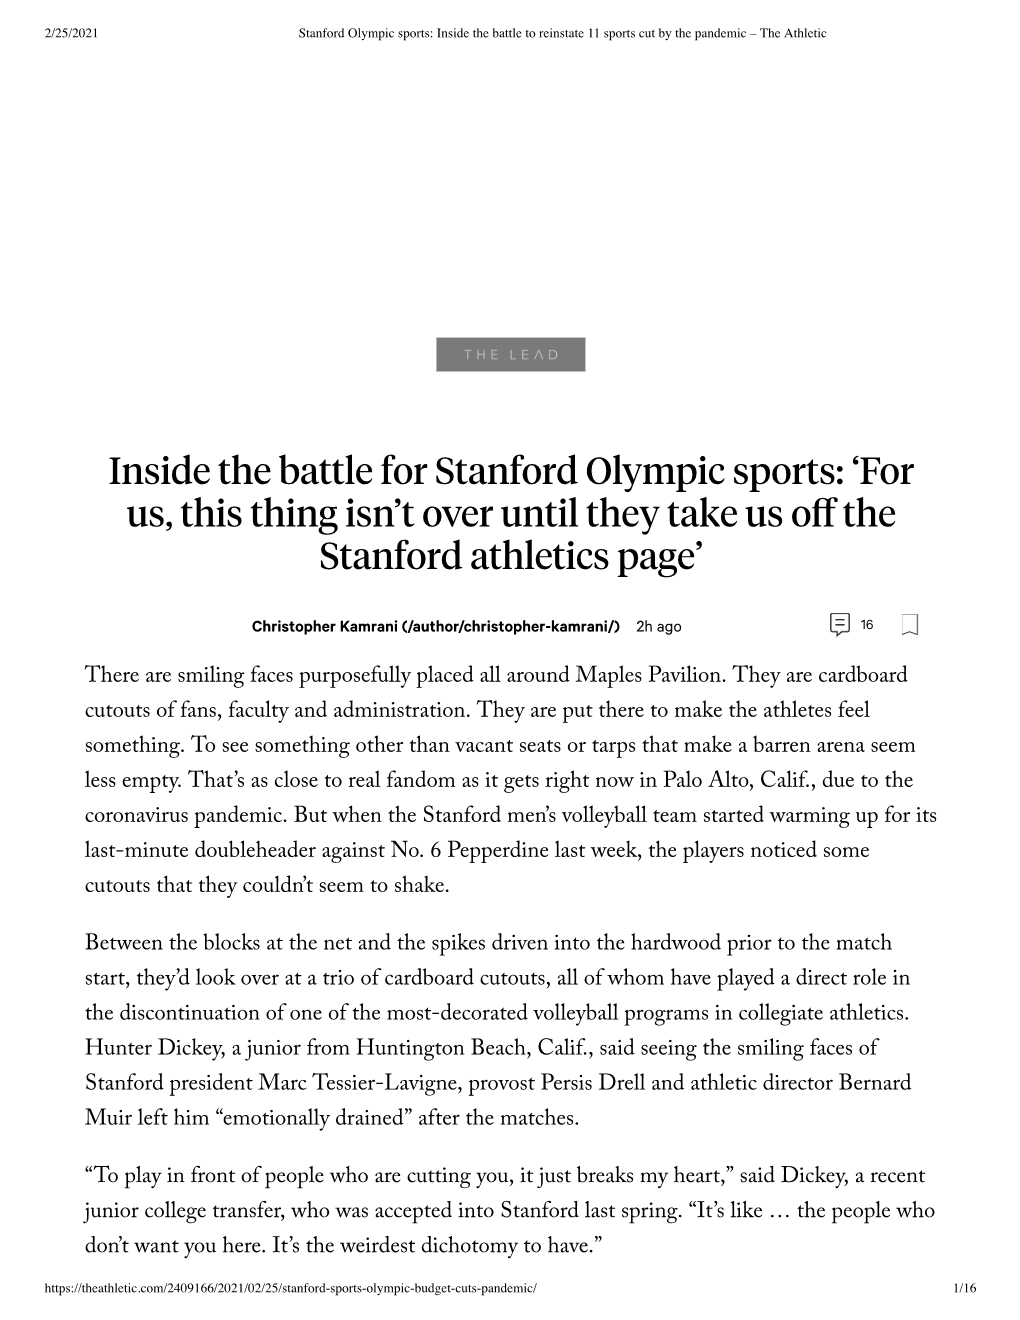 Inside the Battle for Stanford Olympic Sports: ‘For Us, This Thing Isn’T Over Until They Take Us Oﬀ the Stanford Athletics Page’